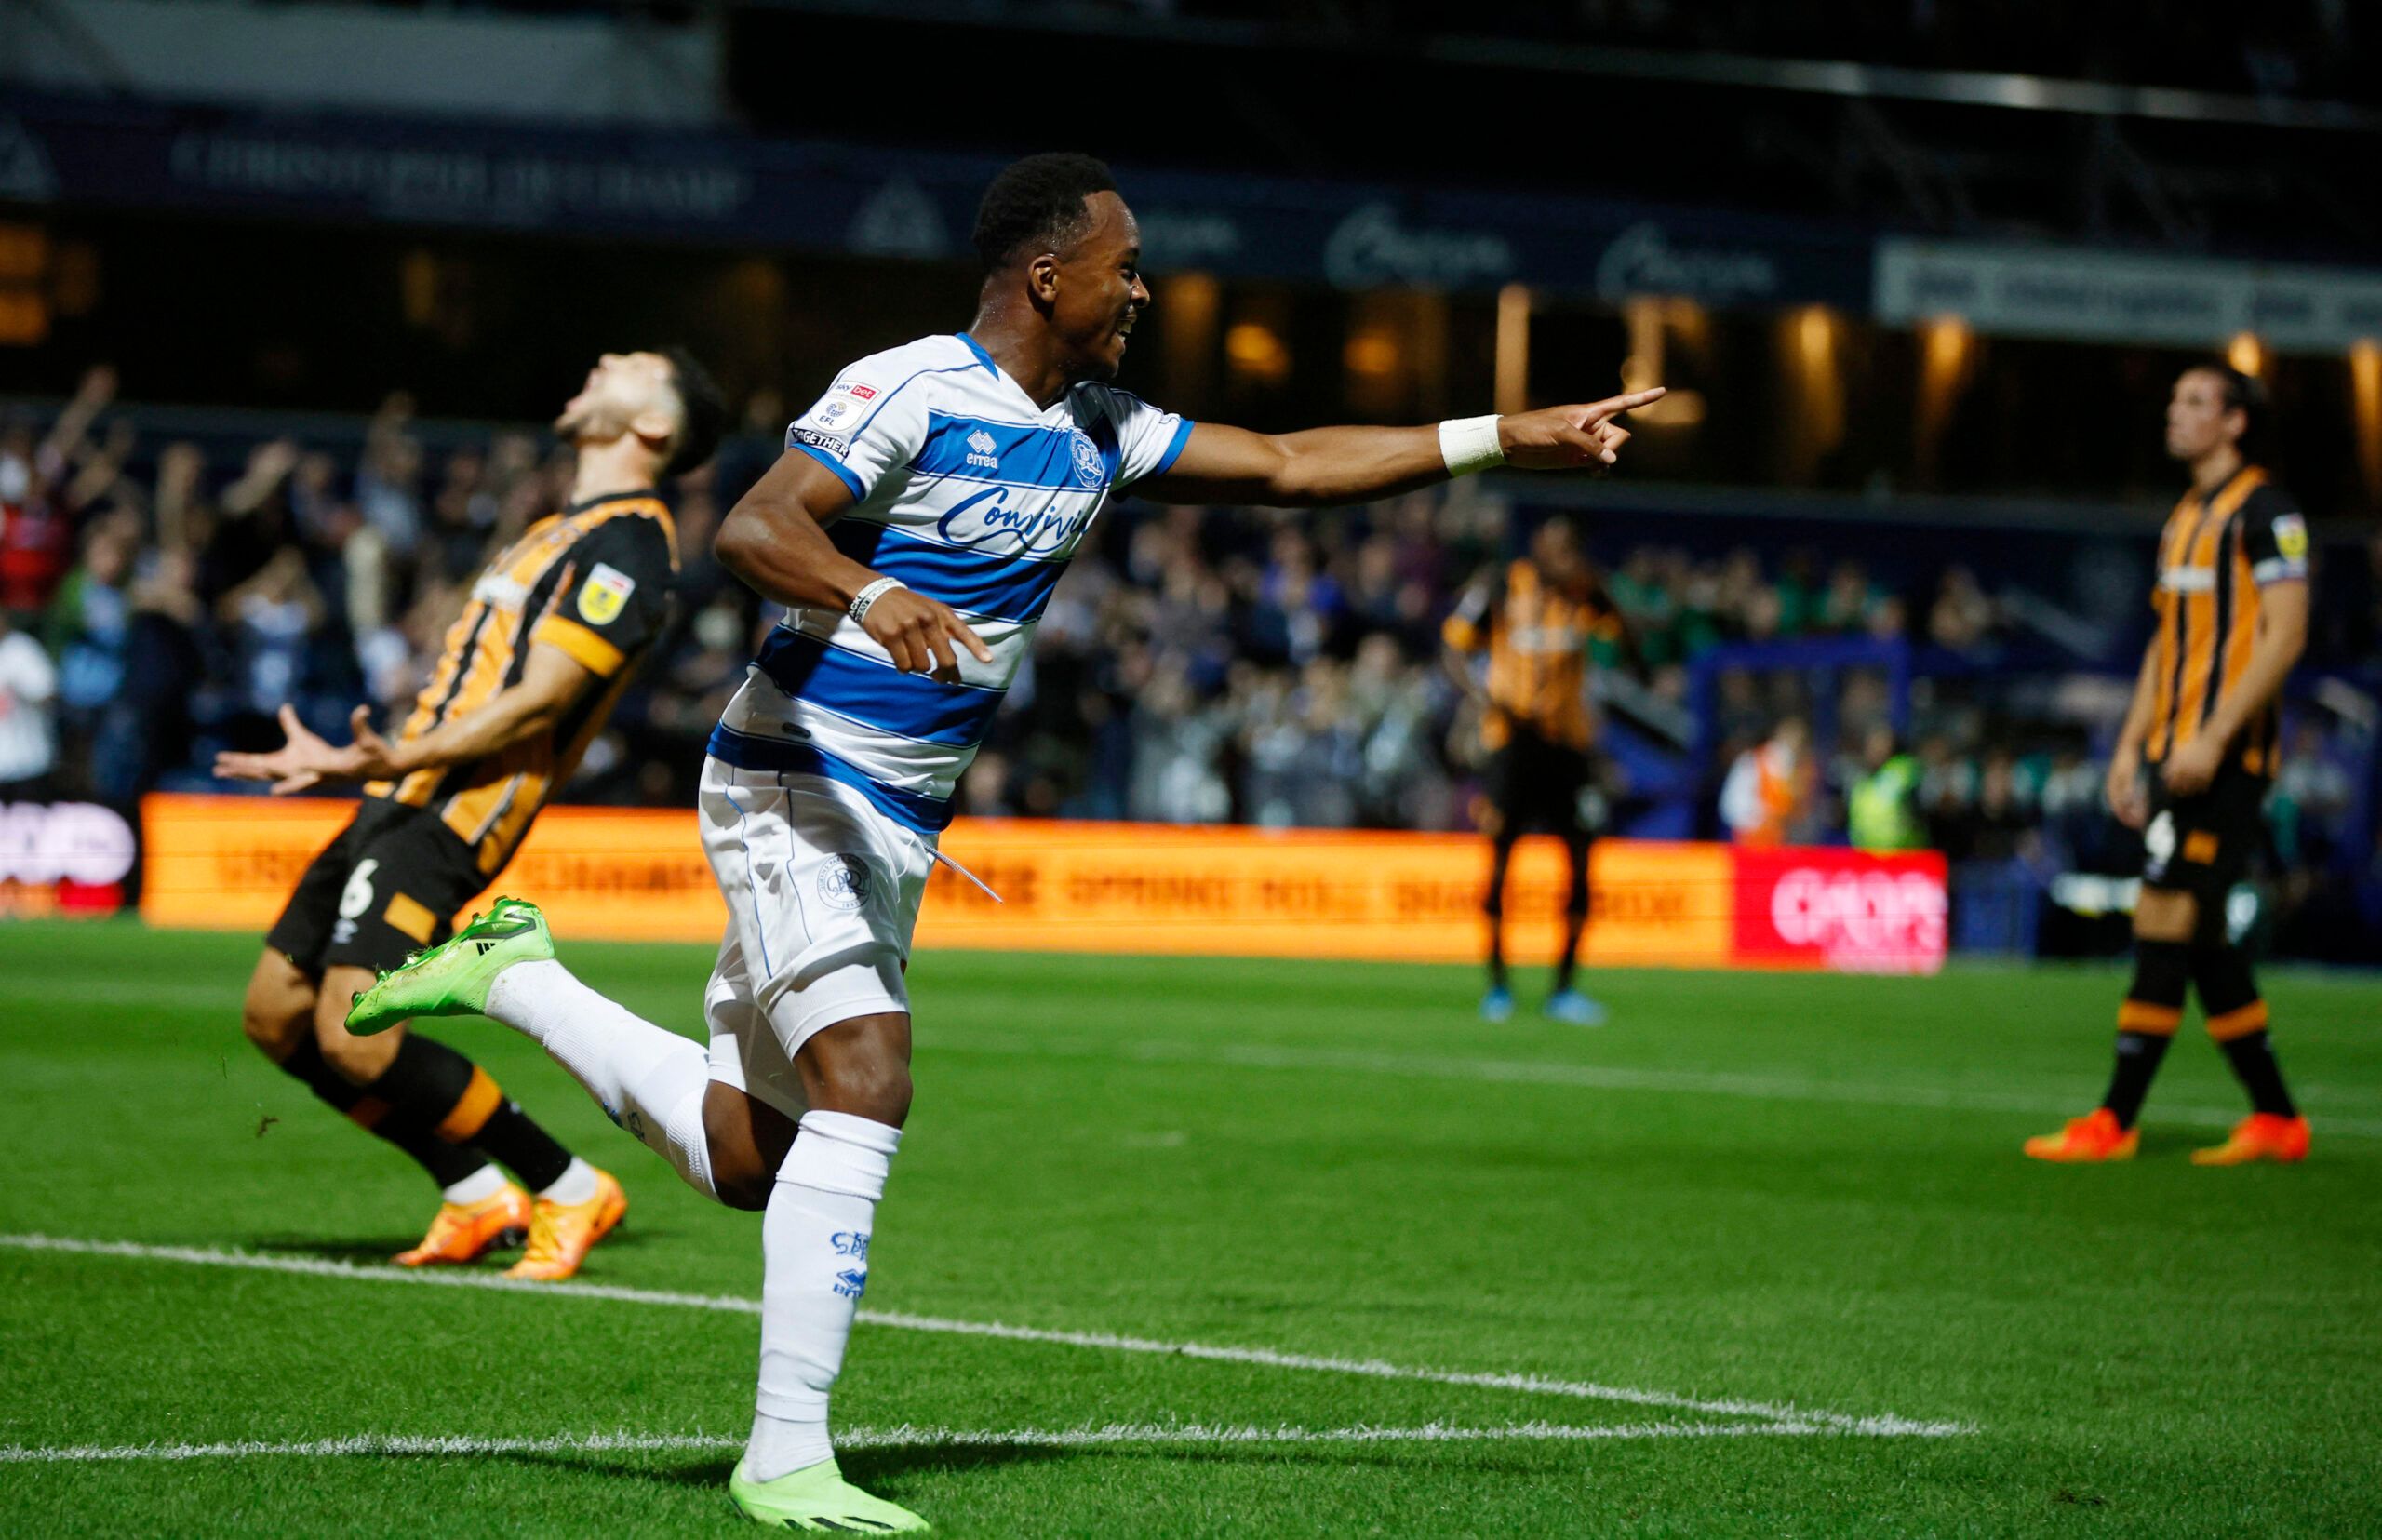 Soccer Football - Championship - Queens Park Rangers v Hull City - Loftus Road, London, Britain - August 30, 2022  Queens Park Rangers' Ethan Laird celebrates scoring their second goal Action Images/John Sibley EDITORIAL USE ONLY. No use with unauthorized audio, video, data, fixture lists, club/league logos or 'live' services. Online in-match use limited to 75 images, no video emulation. No use in betting, games or single club /league/player publications.  Please contact your account representat